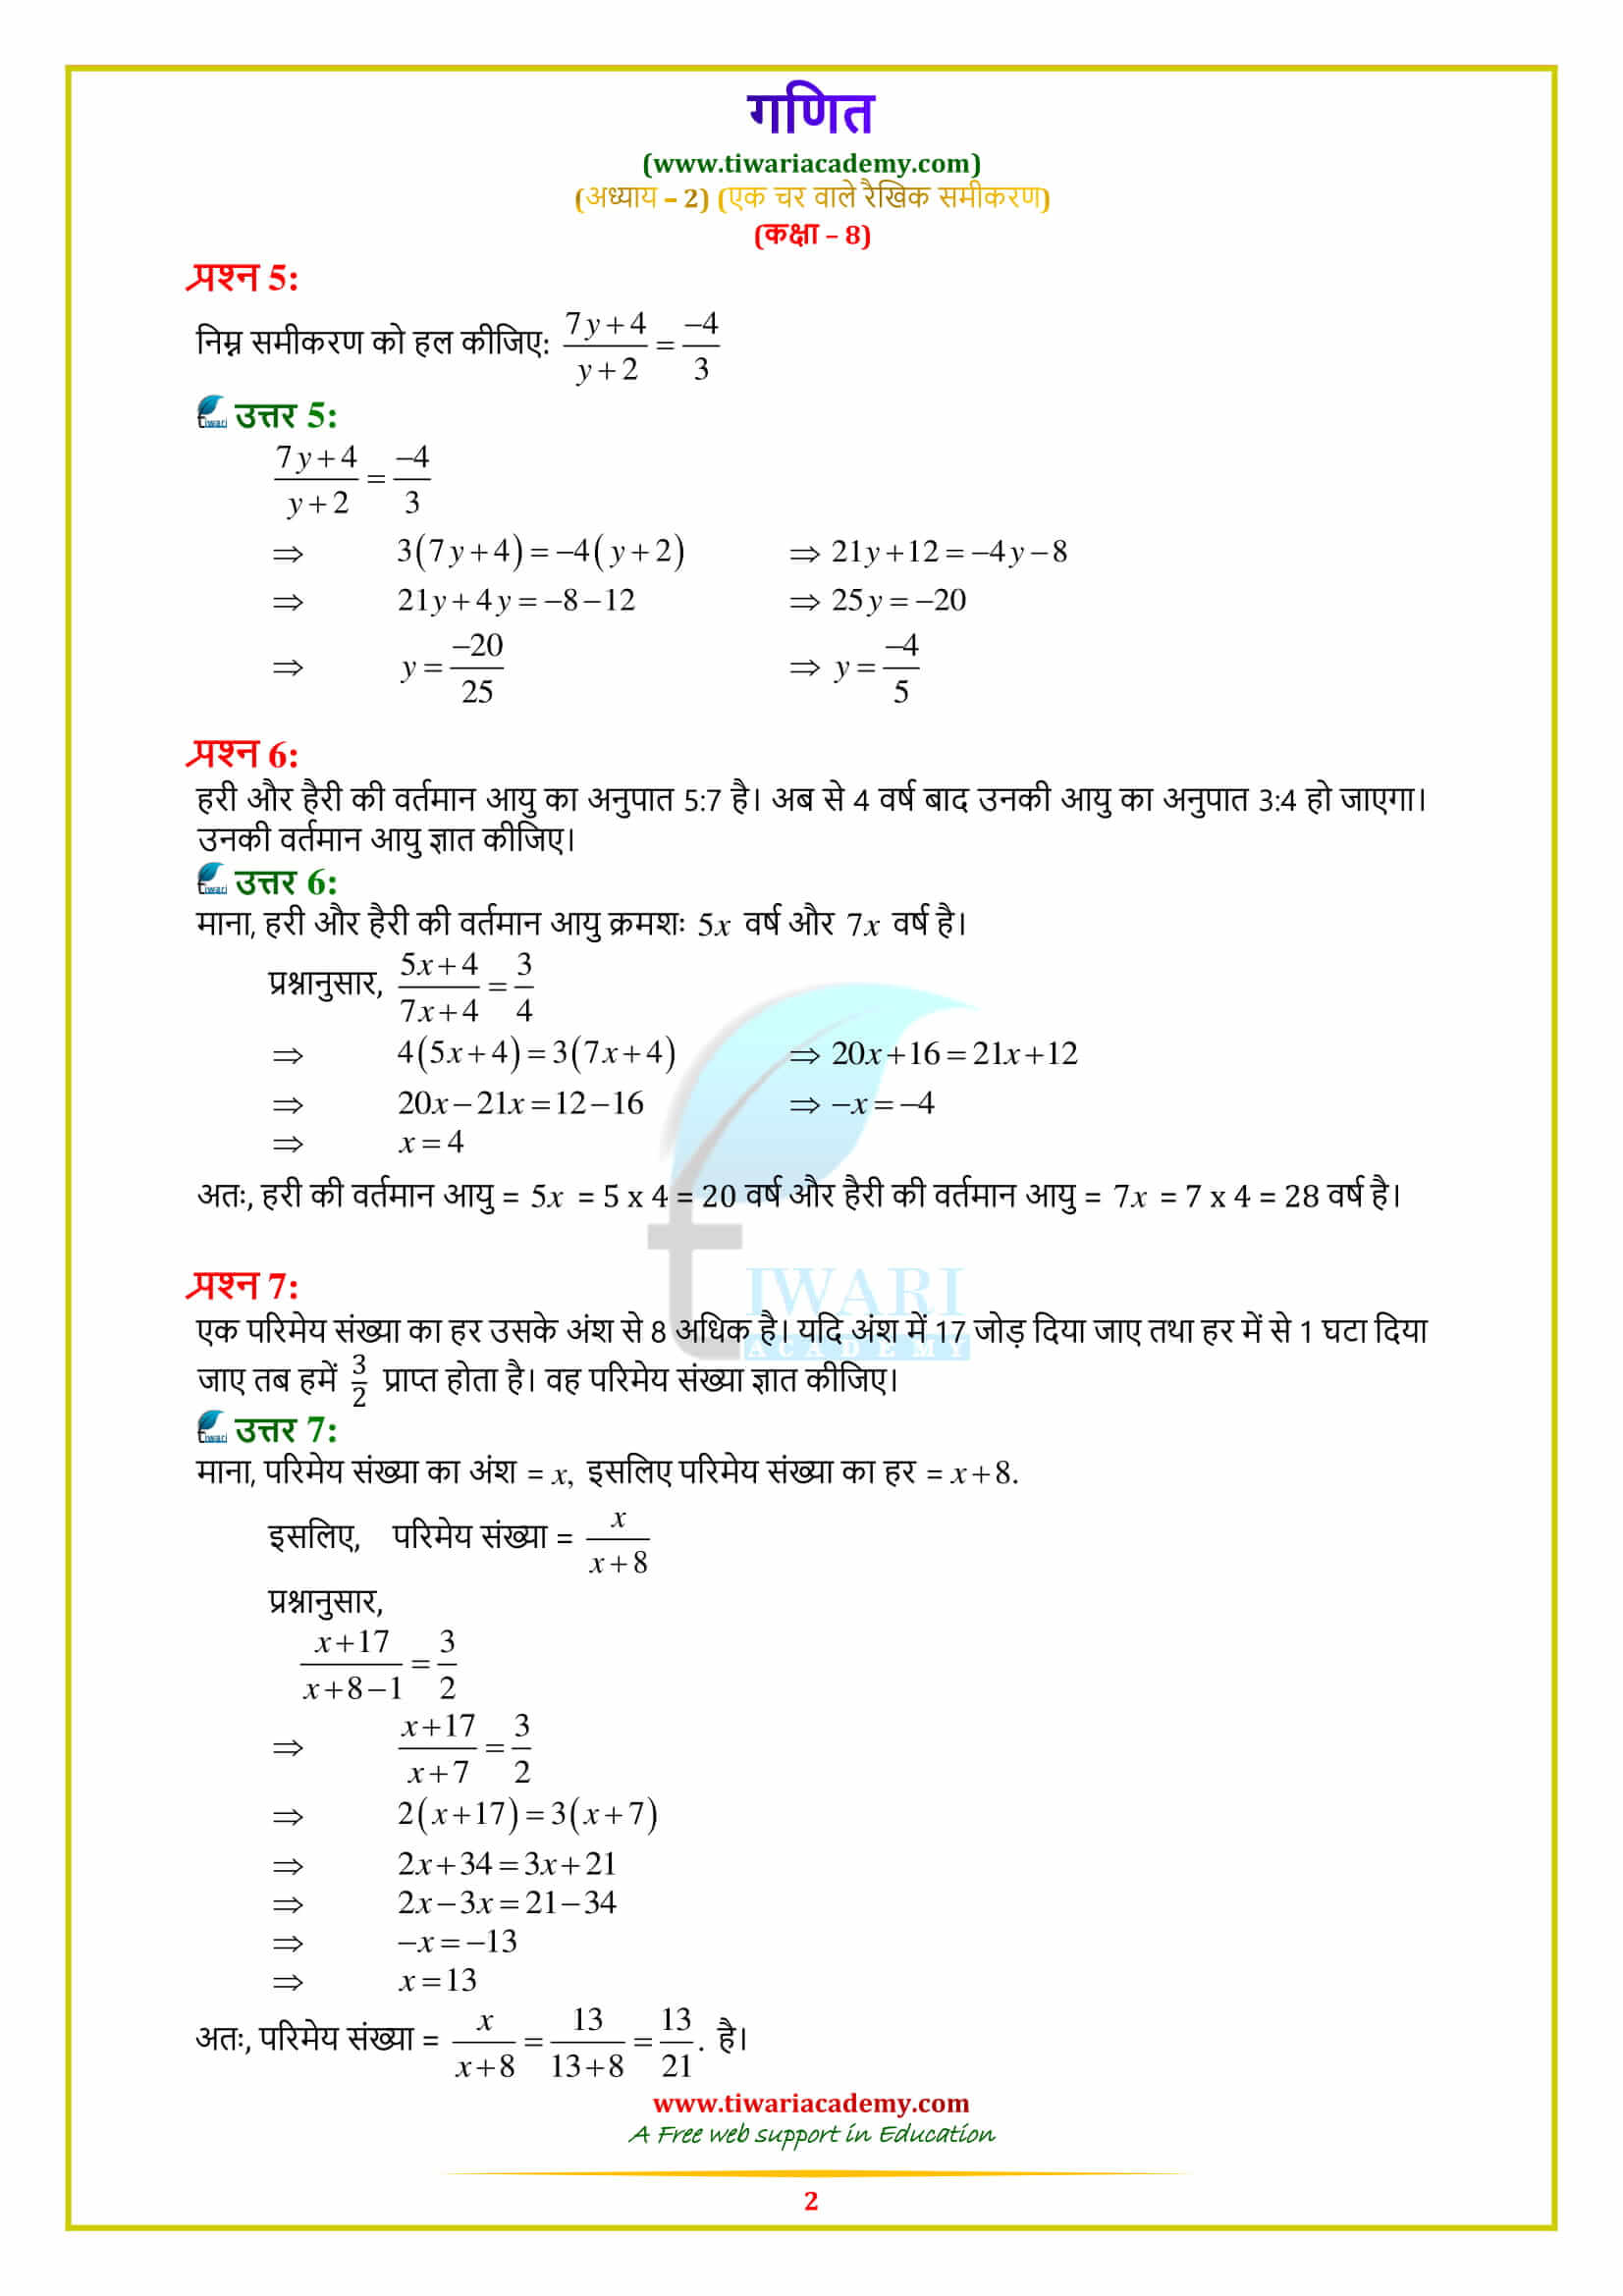 8 Maths Exercise 2.6 Solutions in hindi pdf